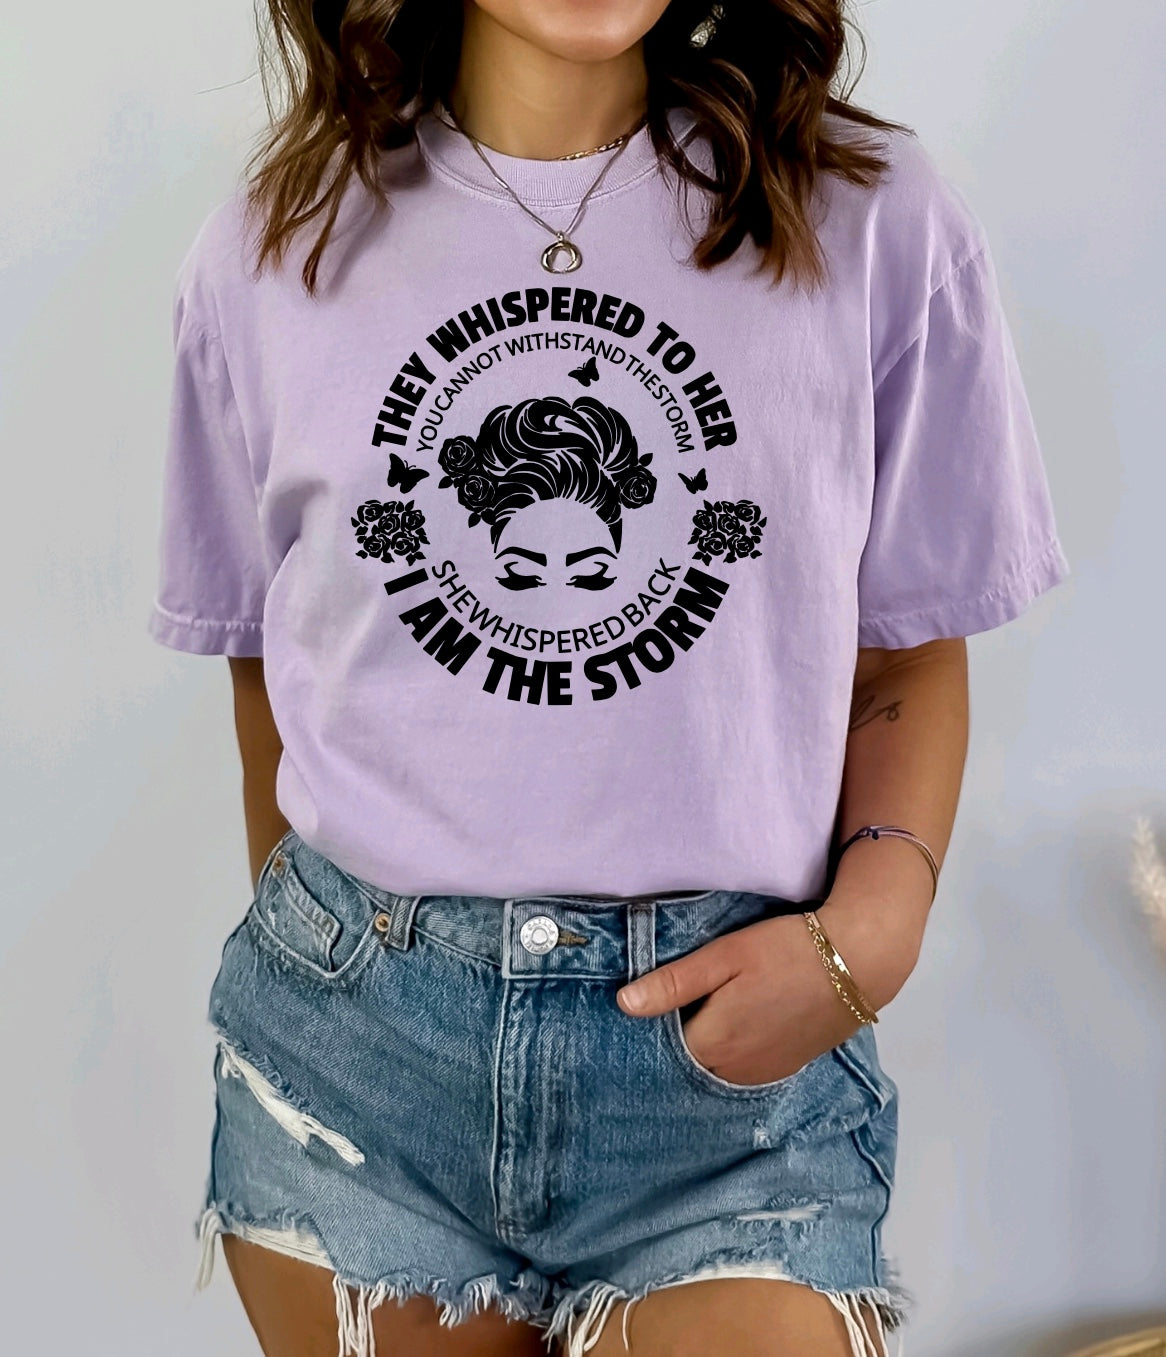 I Am The Storm quote- Comfort Colors Female Empowerment t-shirt